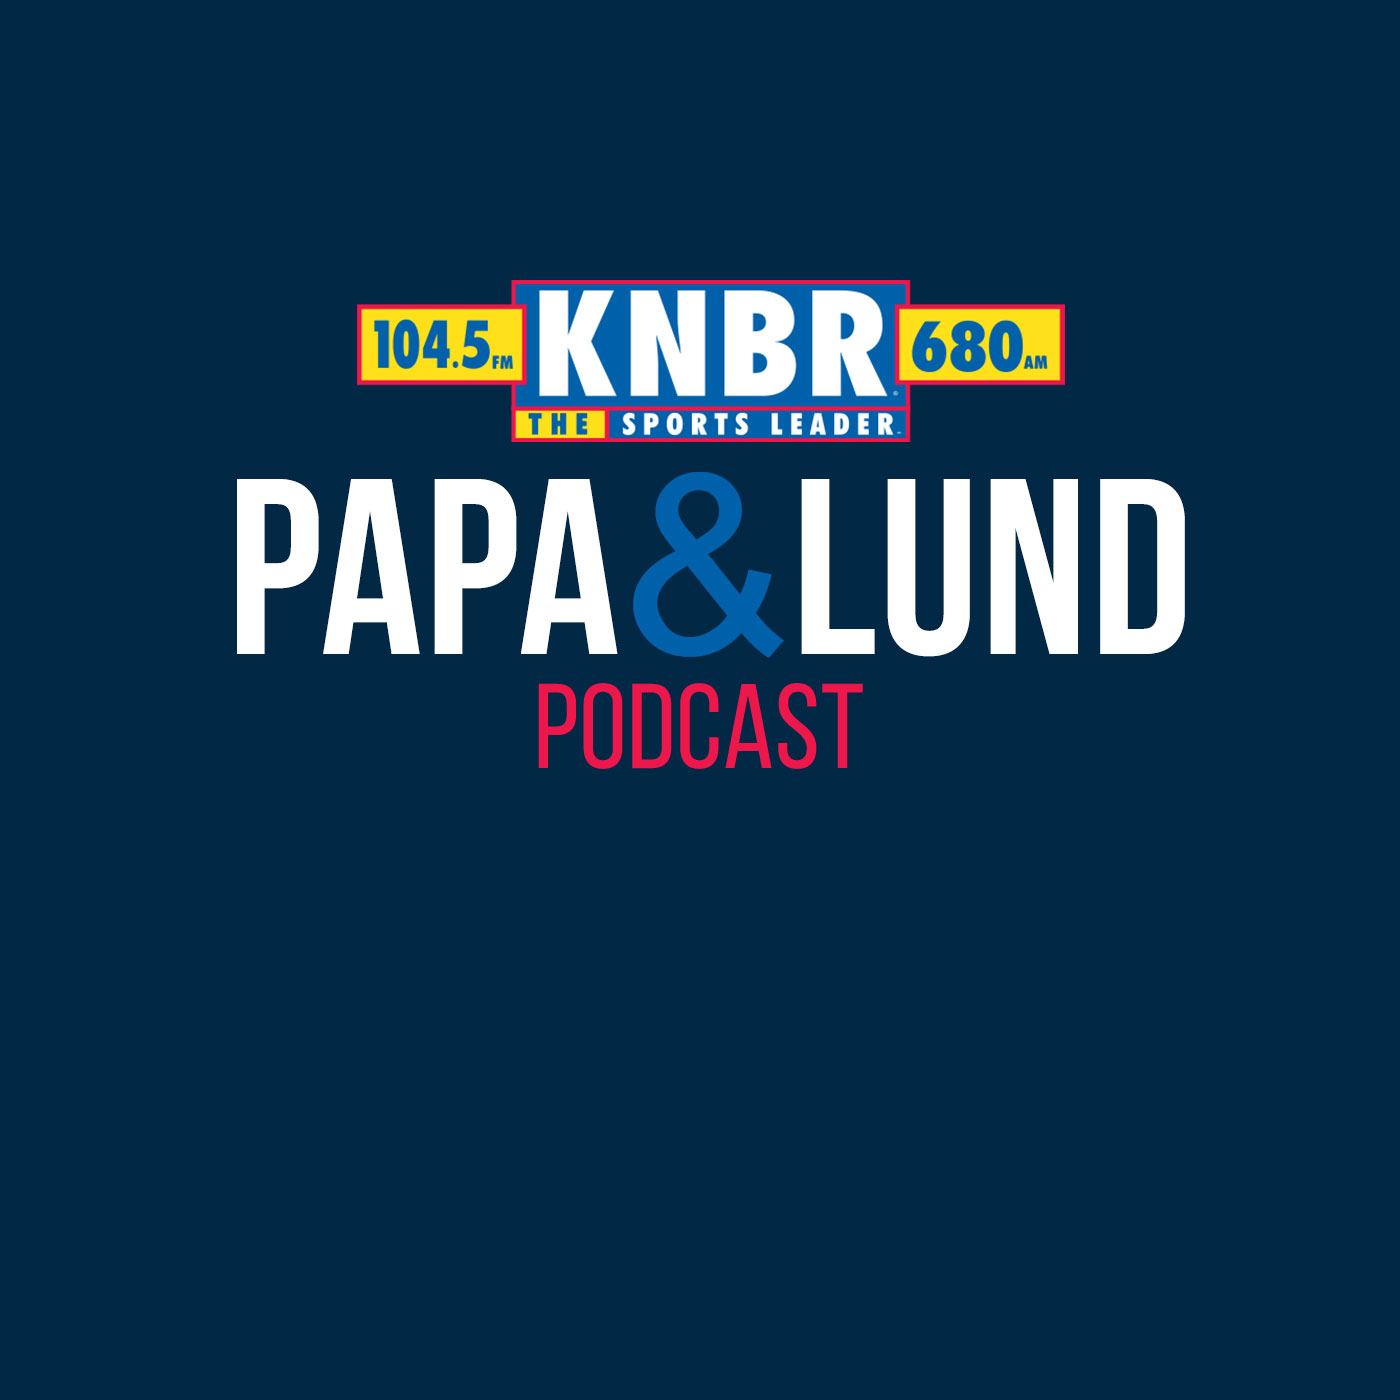 4-4 Marcus Thompson joins Papa & Lund to discuss what the return of Andrew Wiggins will look like for the Warriors to end the season and into the Playoffs